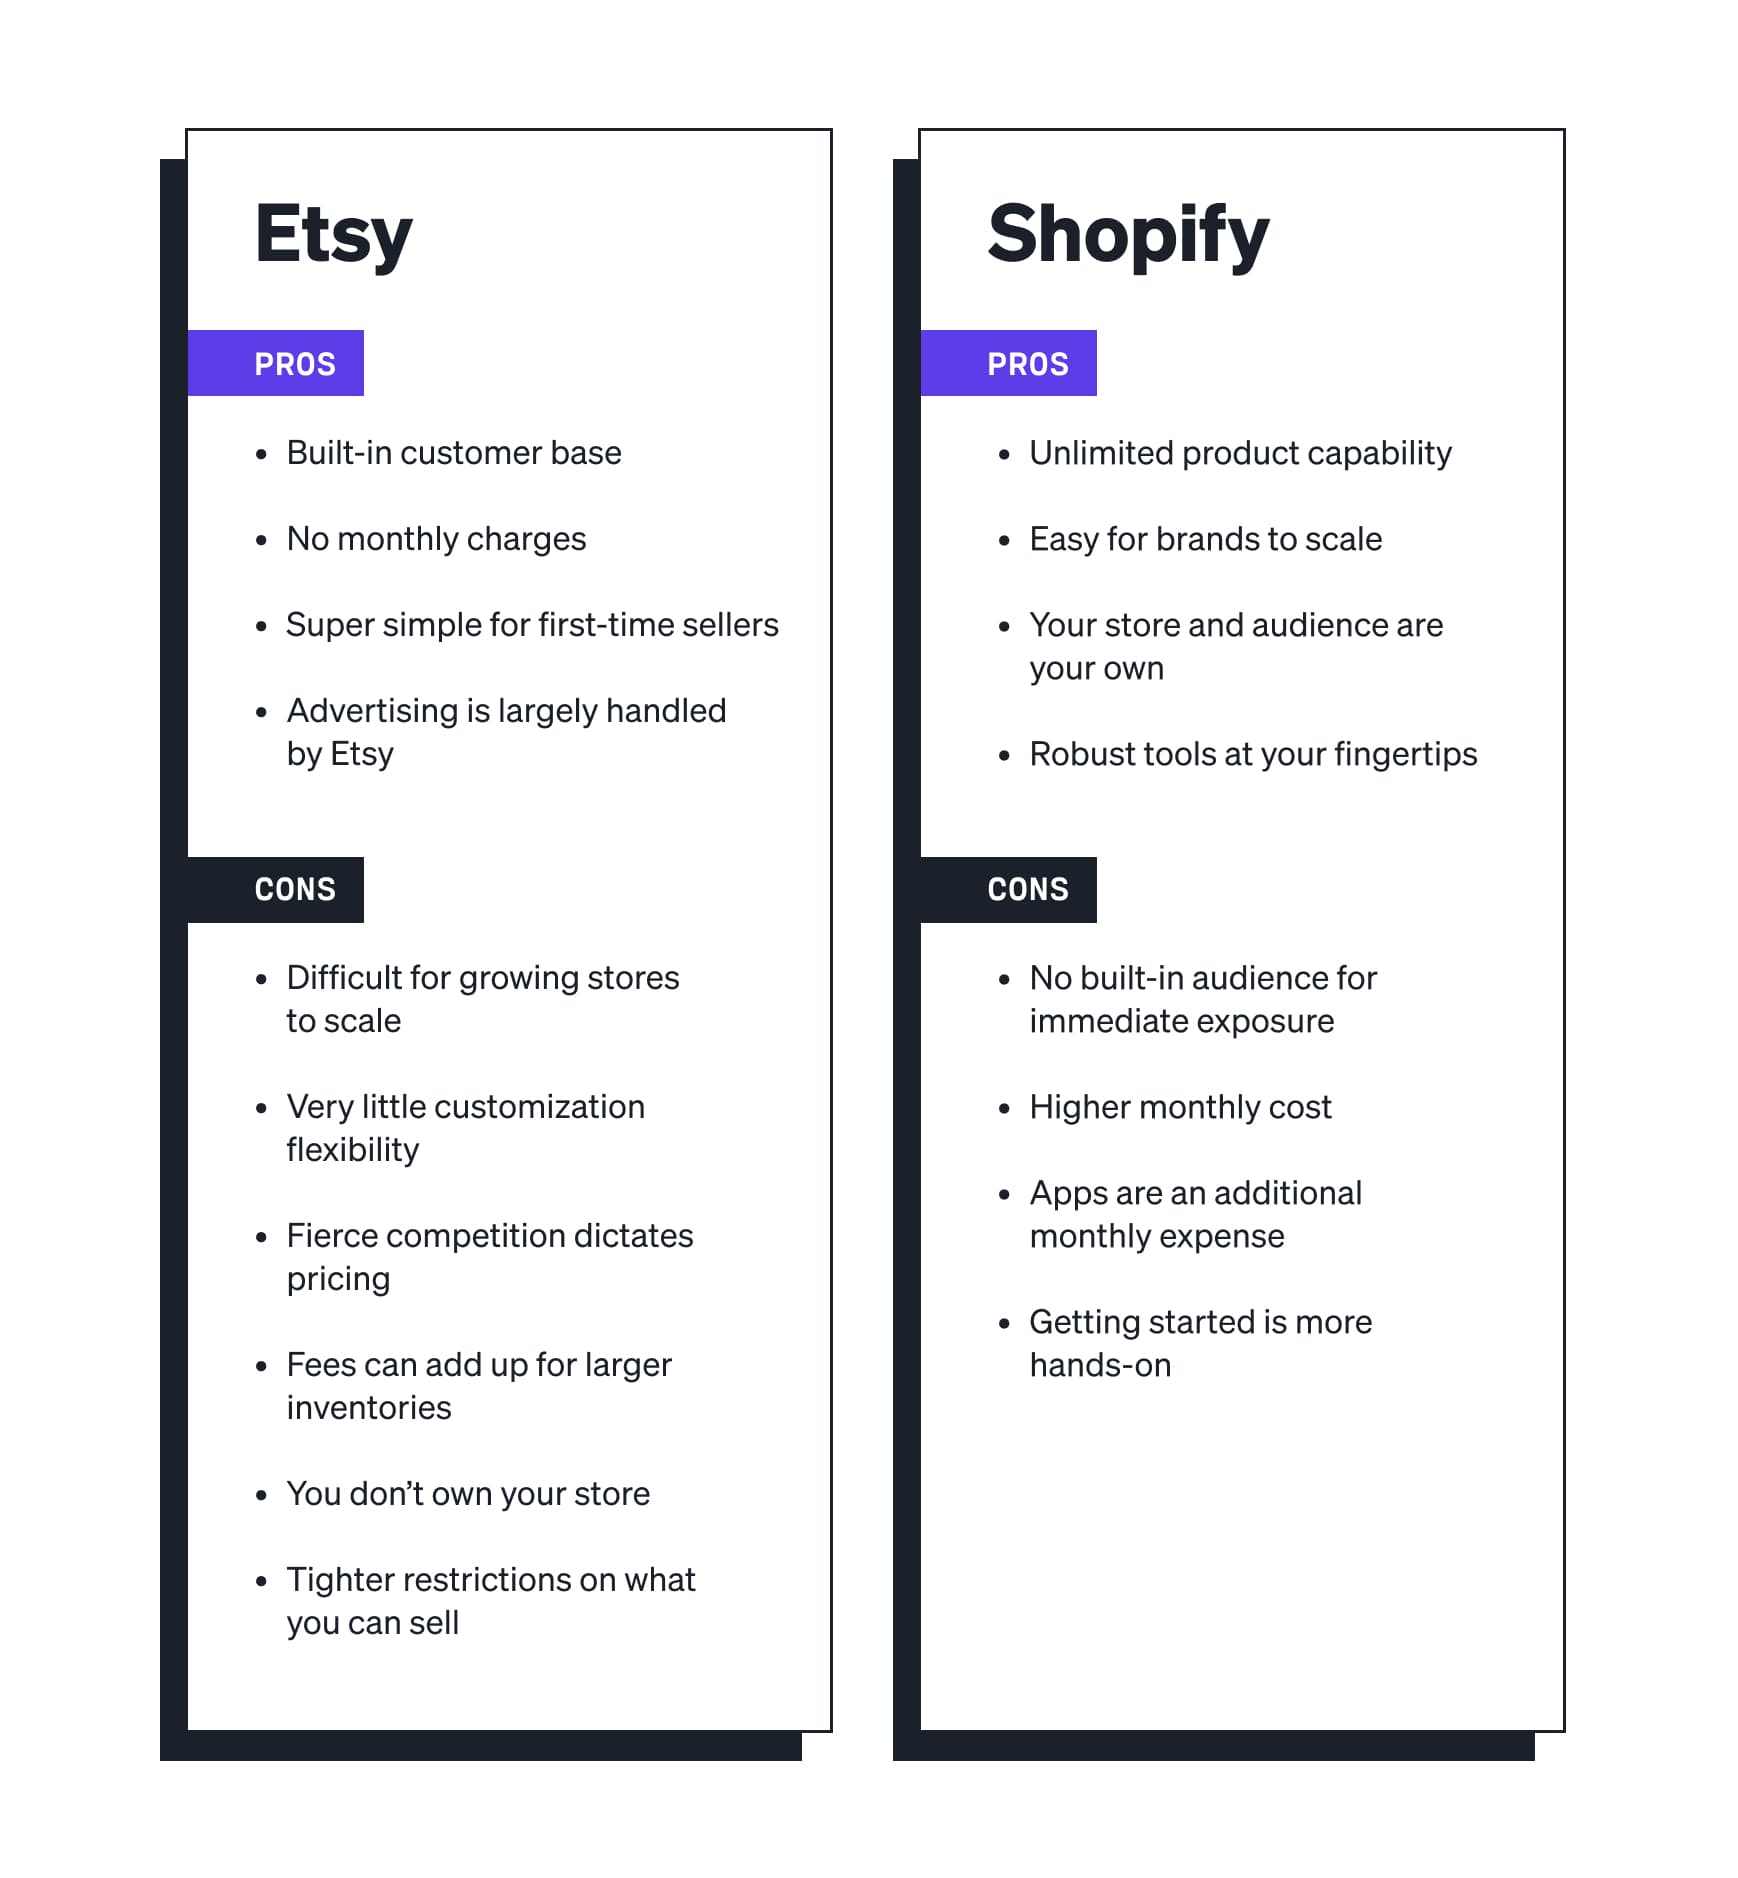 pros and cons of etsy and shopify